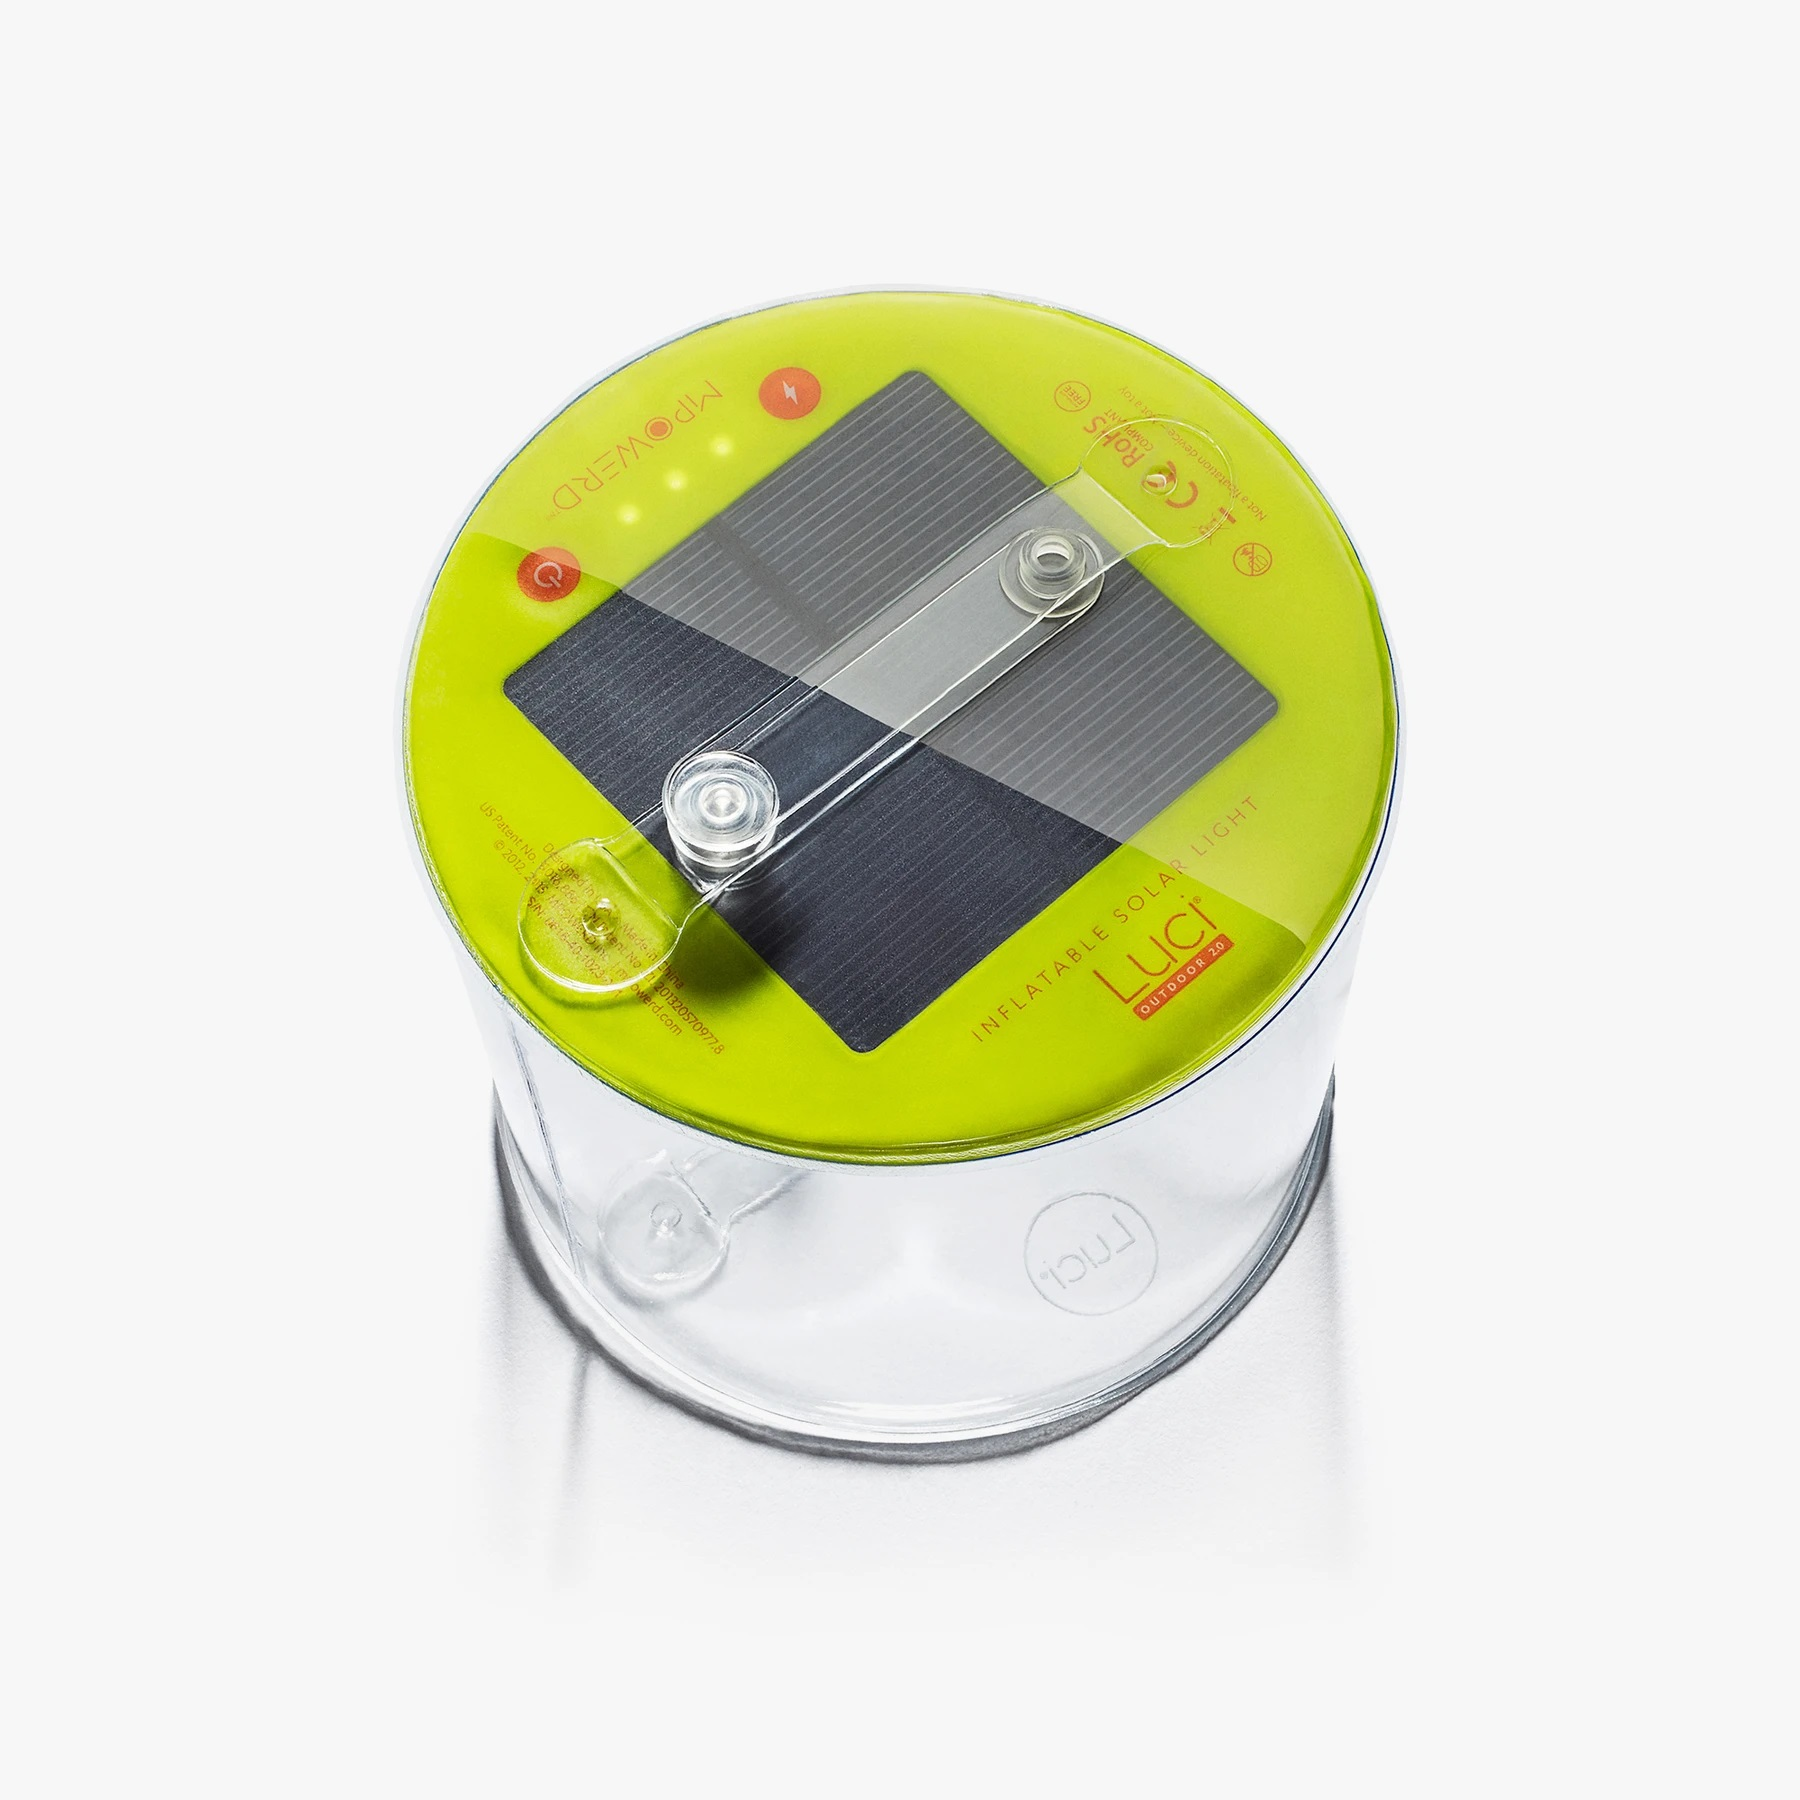 MPOWERED LUCI 2.0 LED OUTDOOR Lampe Solar